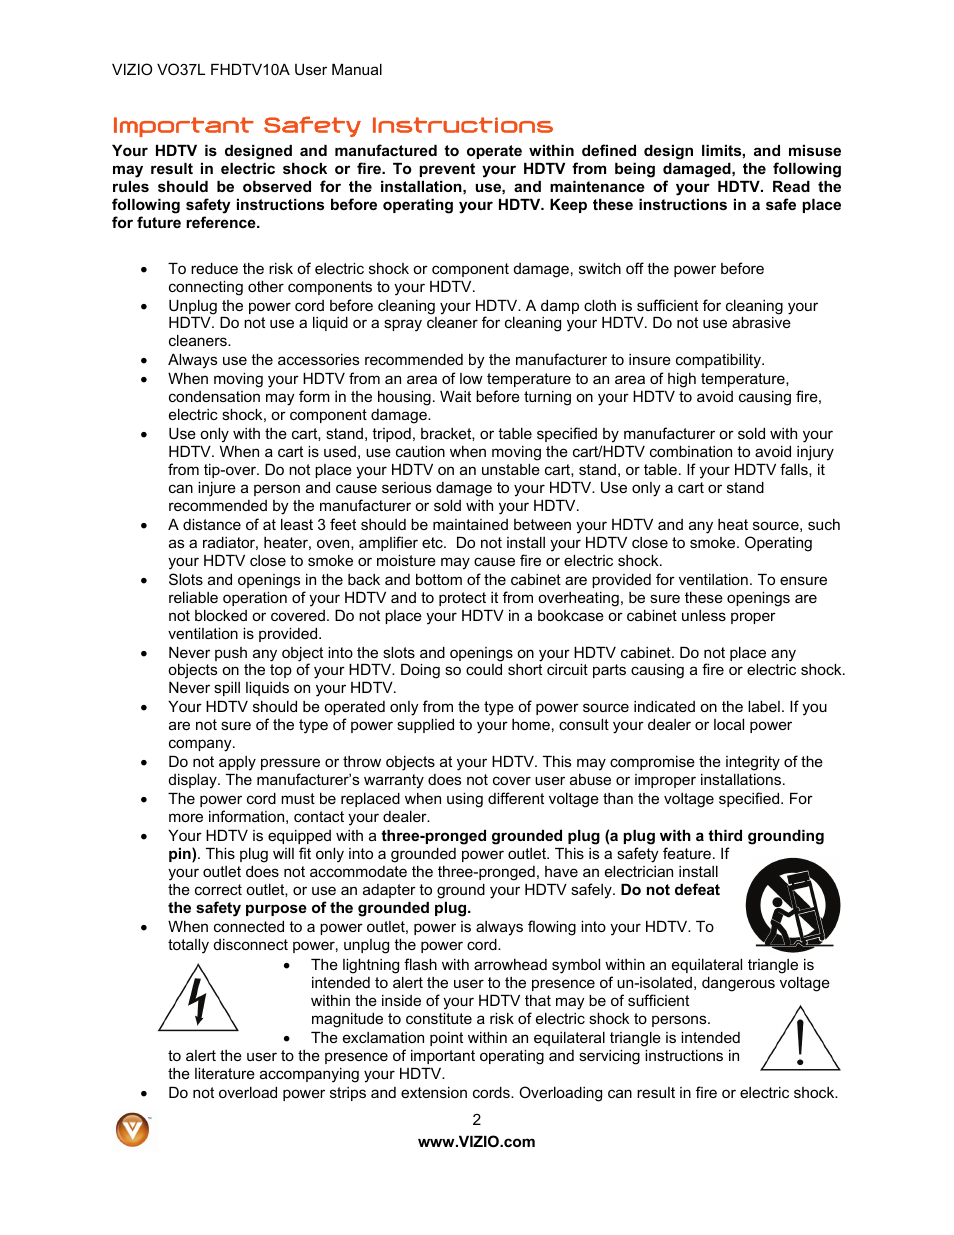 Important safety instructions | Vizio VO37L FHDTV10A User Manual | Page 2 / 80